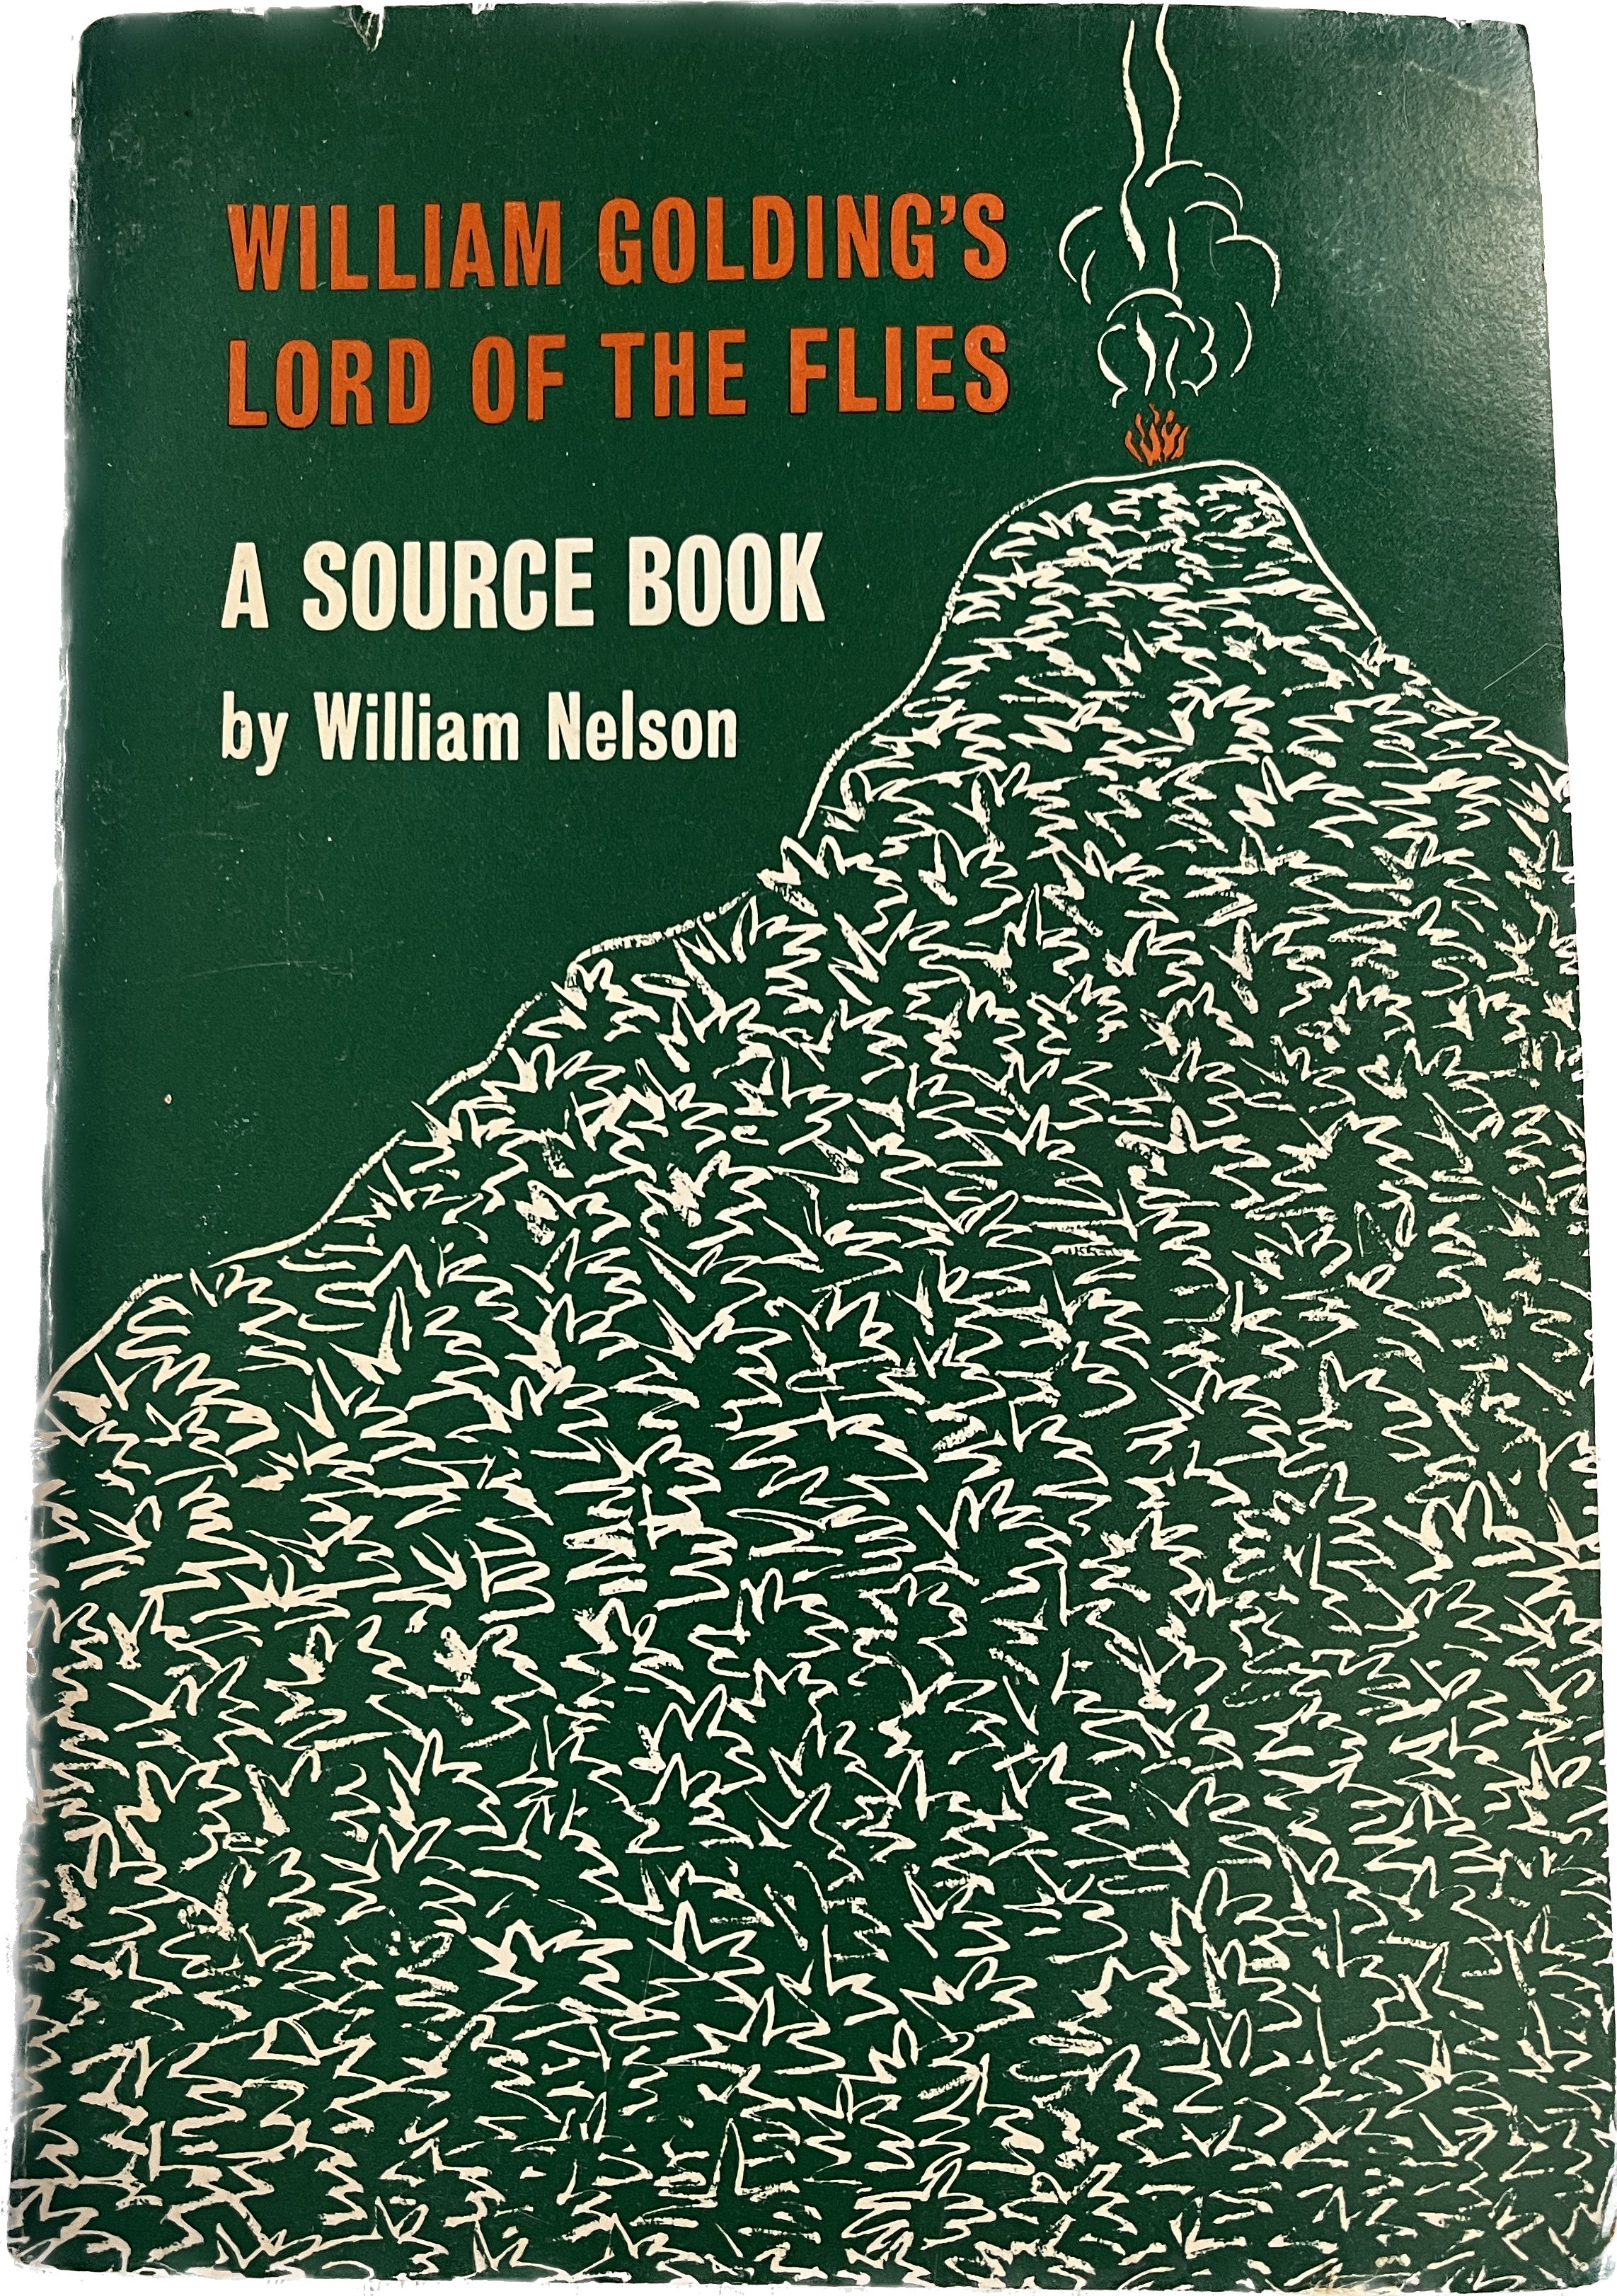 william golding's lord of the flies: a sourcebook by william nelson